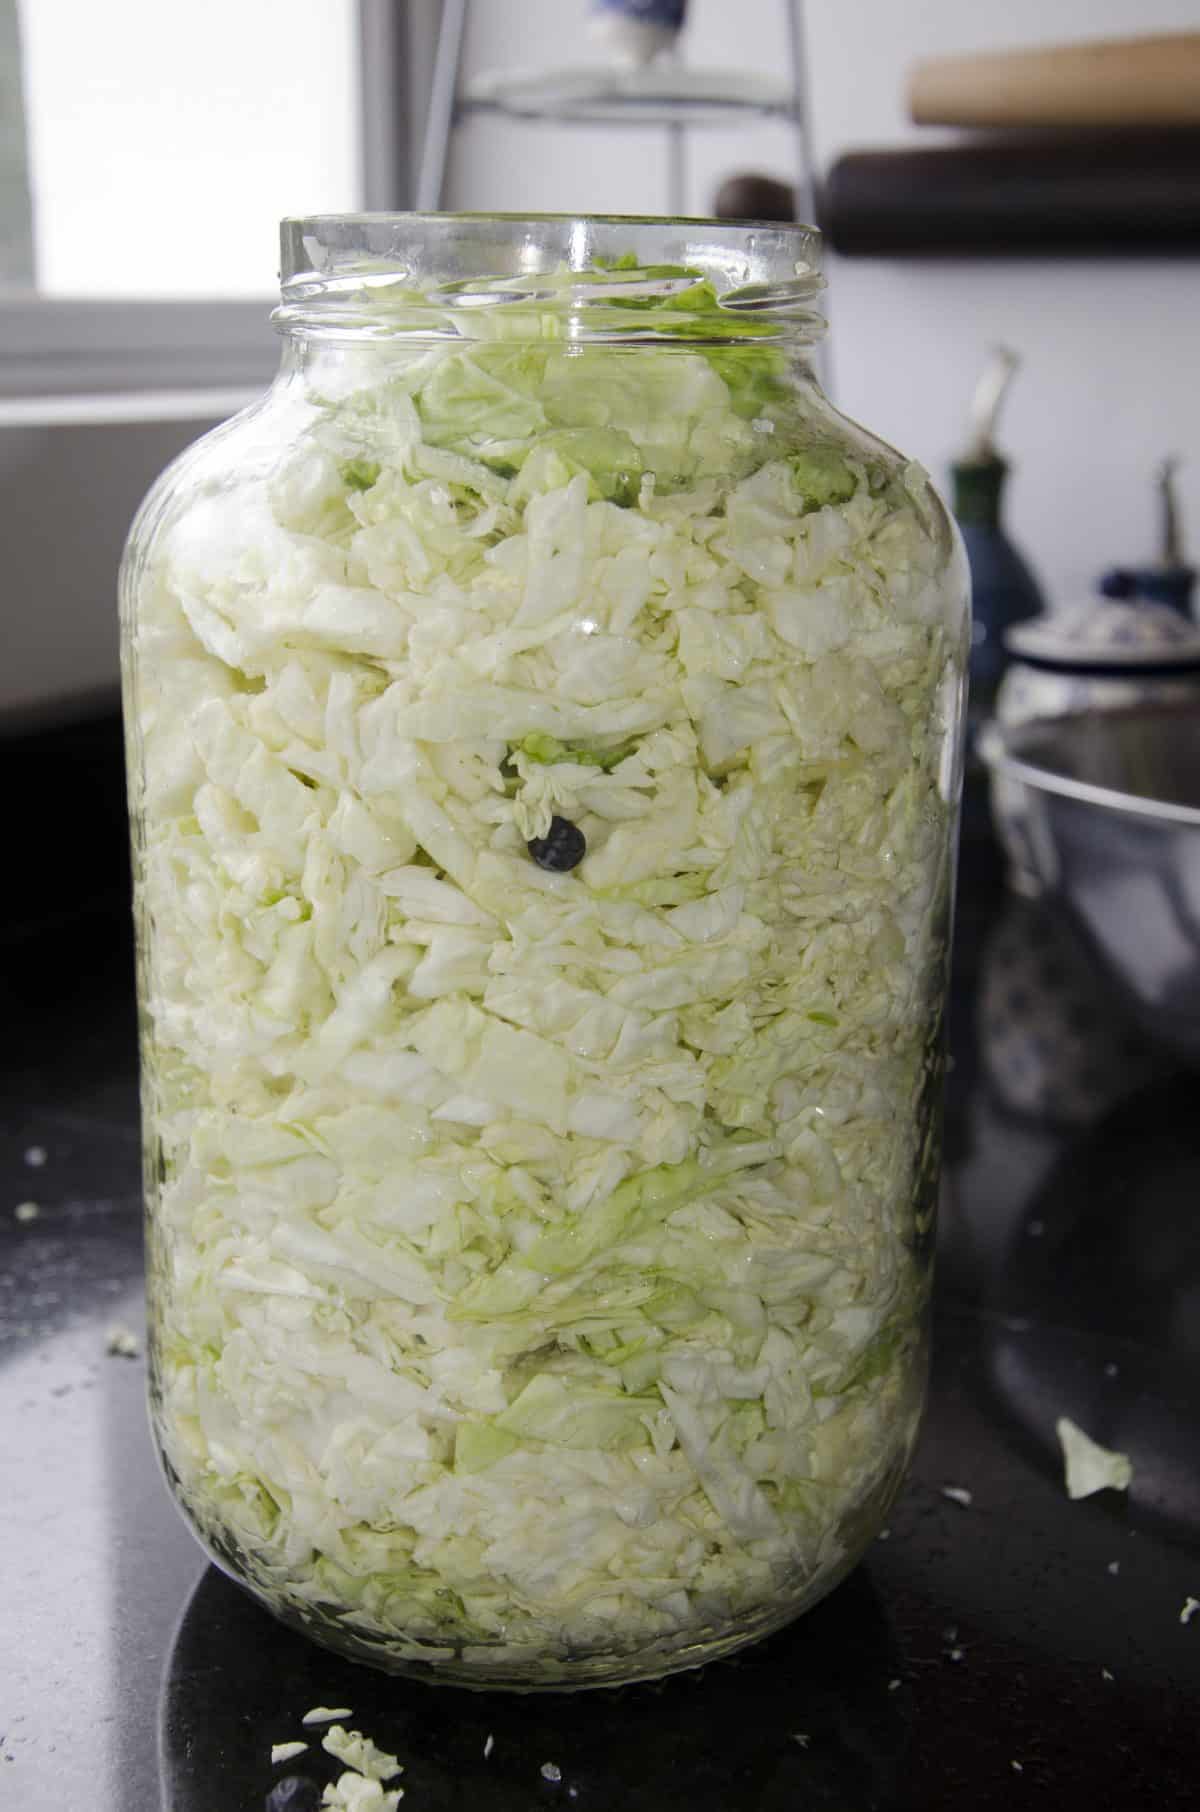 A fully packed jar full of cabbage, salt, and a few juniper berries.